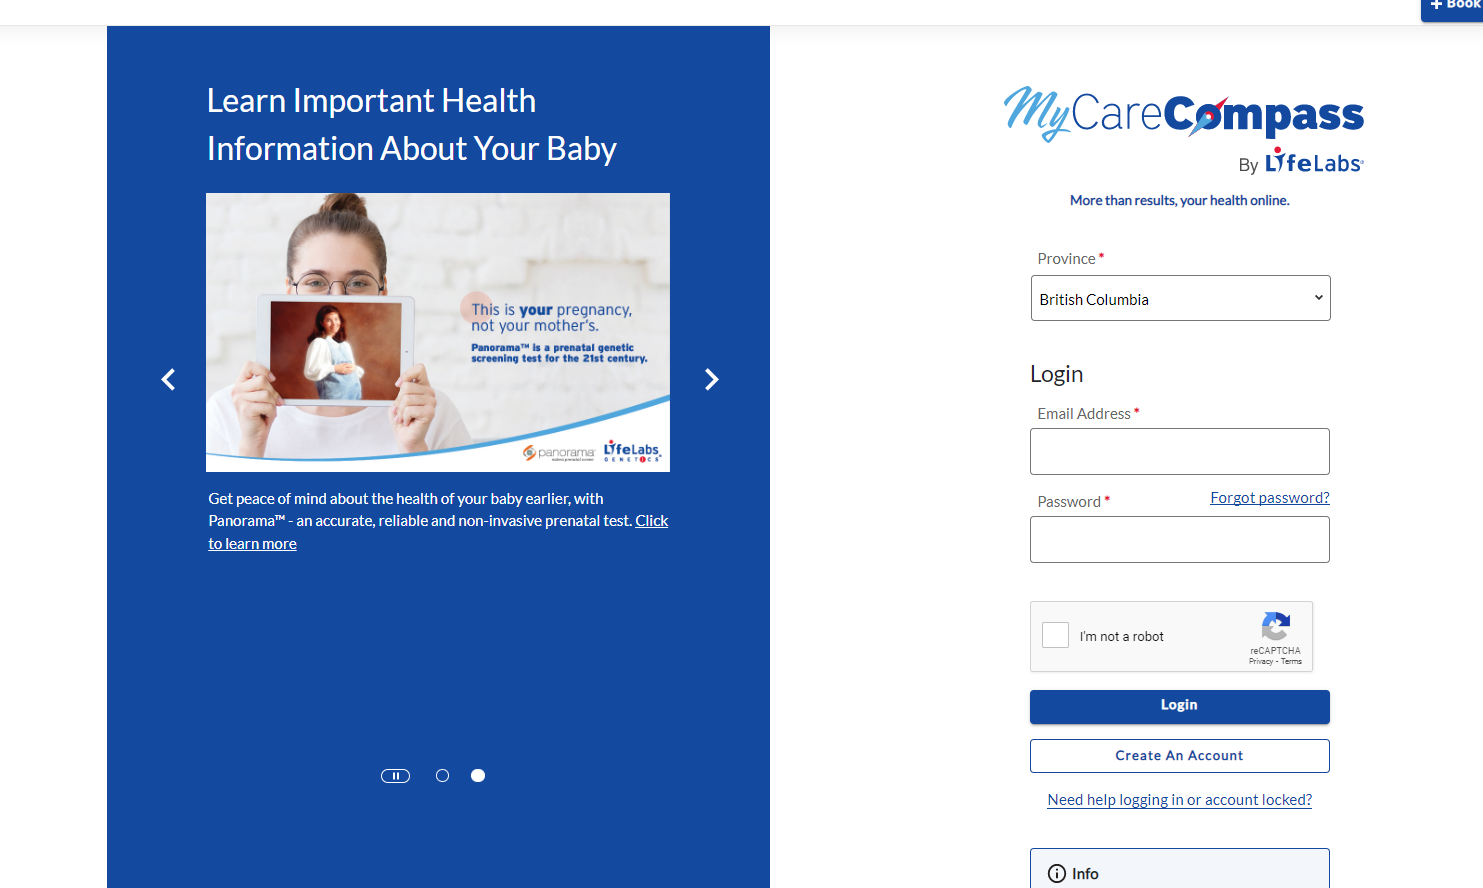 How Can You mycarecompass login & New contact Number Register